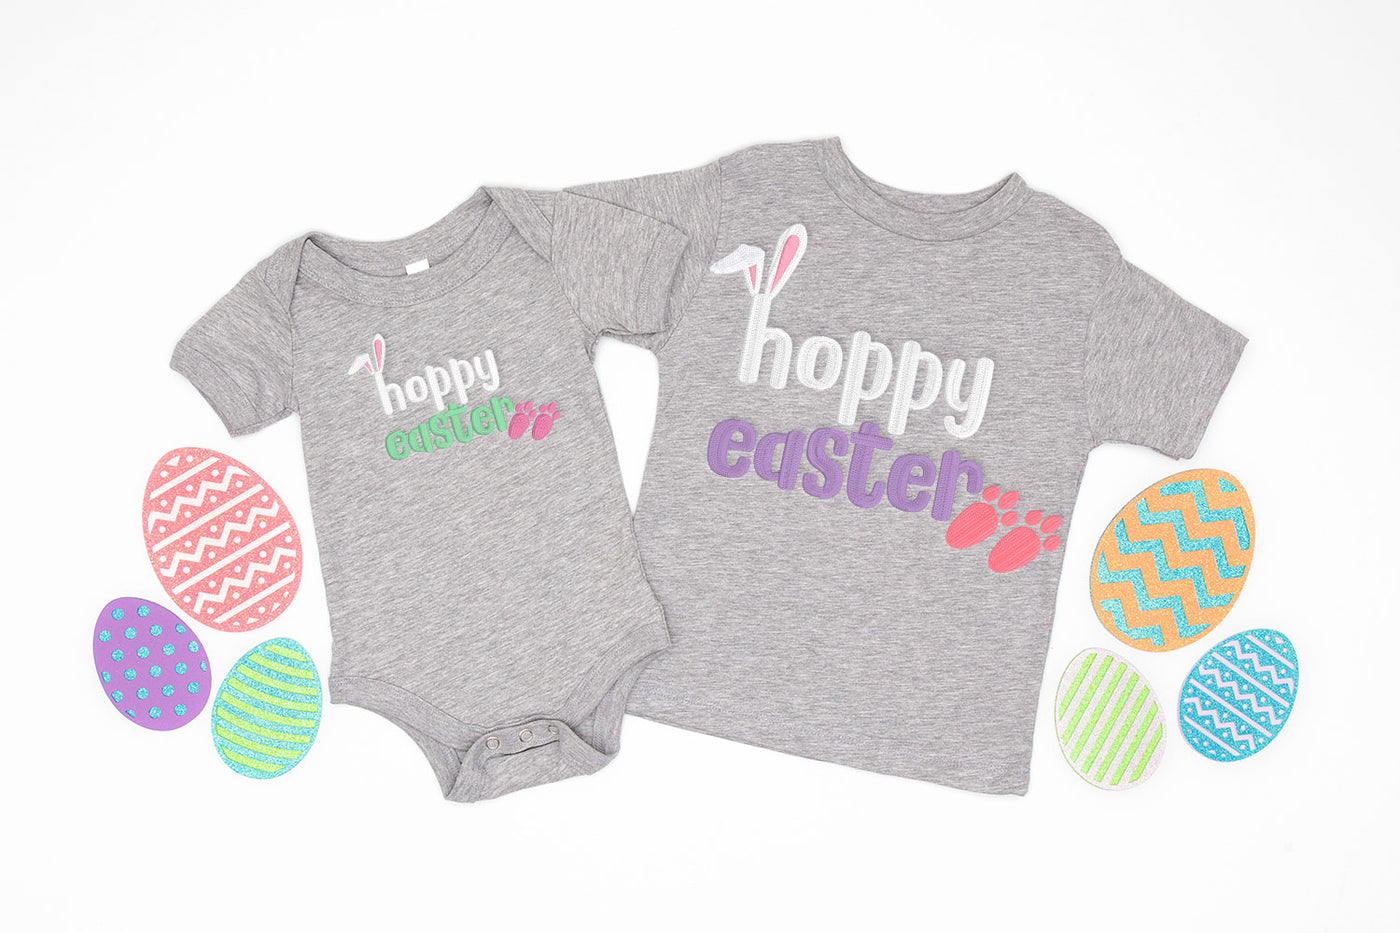 Hoppy Easter with Bunny Ears and Feet Embroidery File